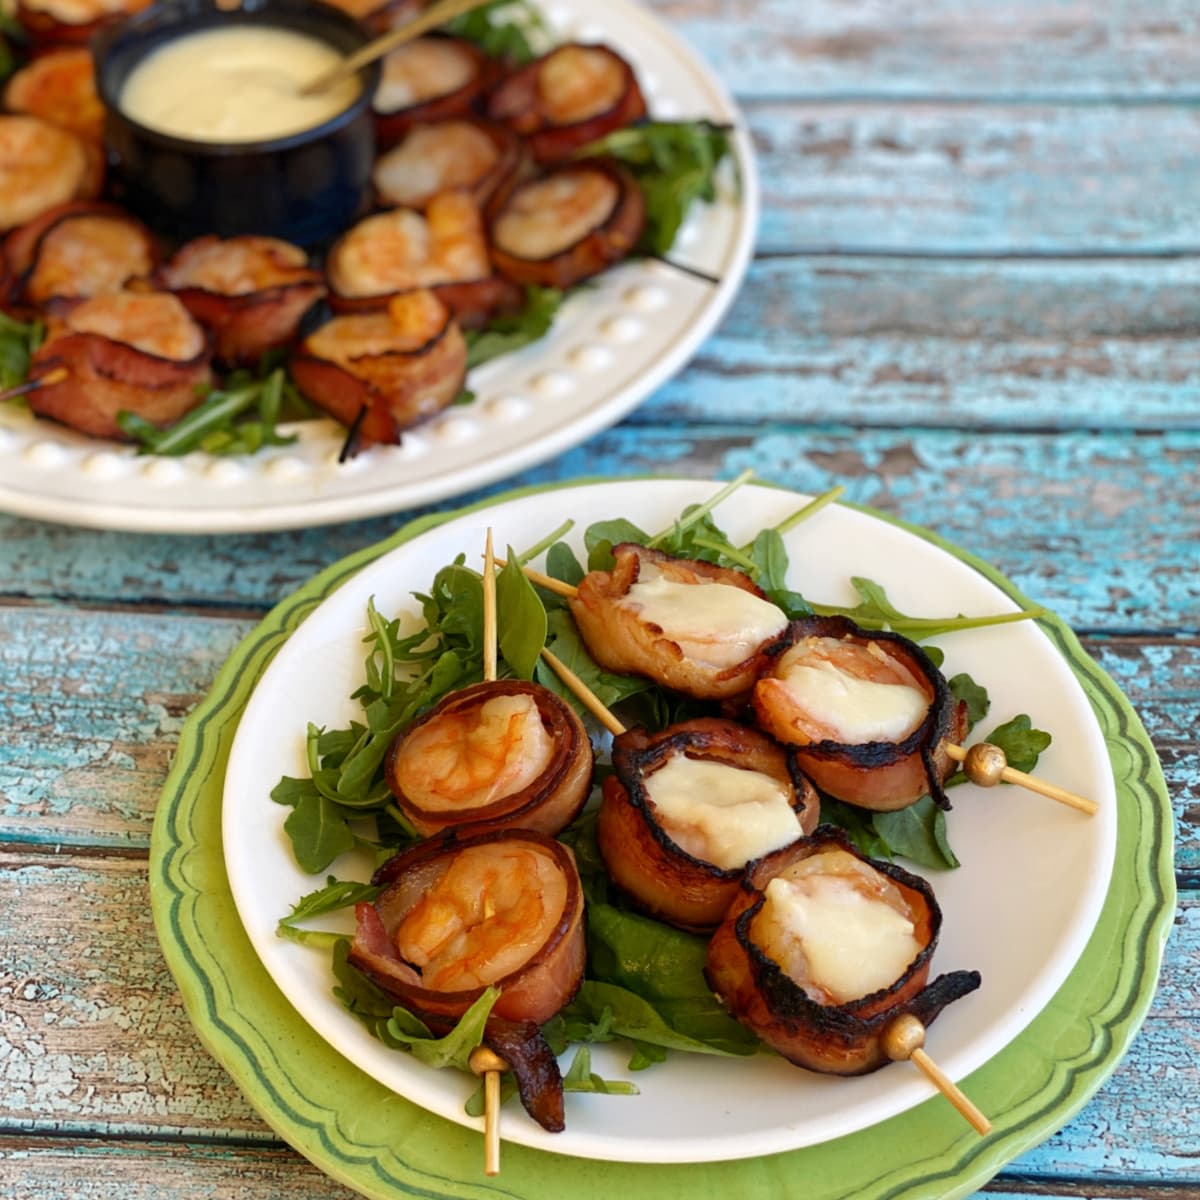 Bacon wrapped shrimps drizzled with pineapple-horseradish.